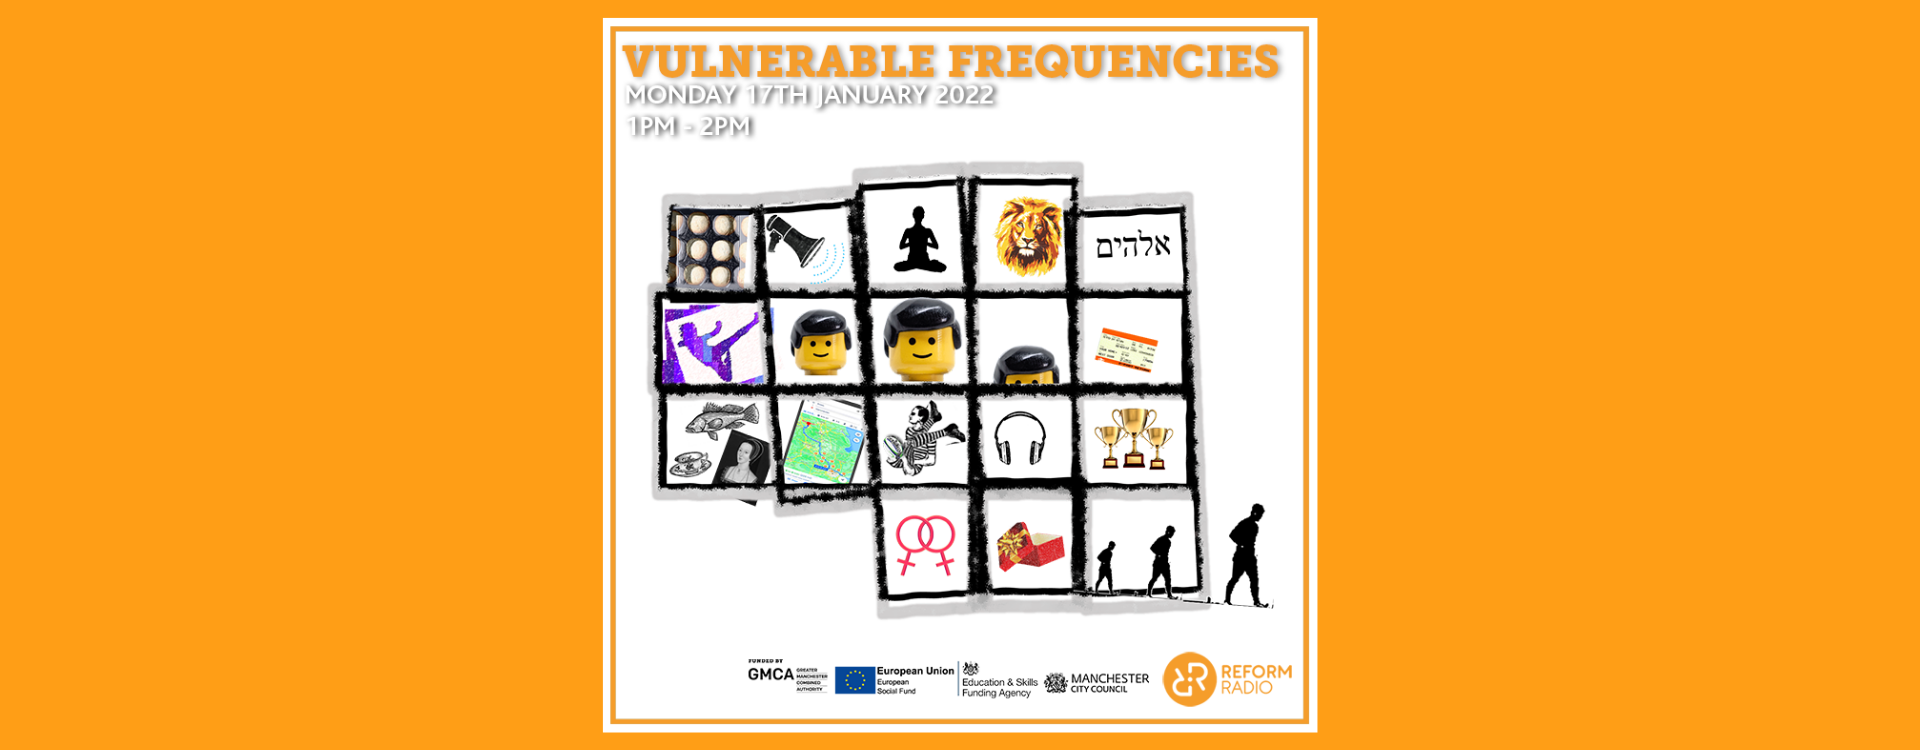 Vulnerable Frequencies (featured image)